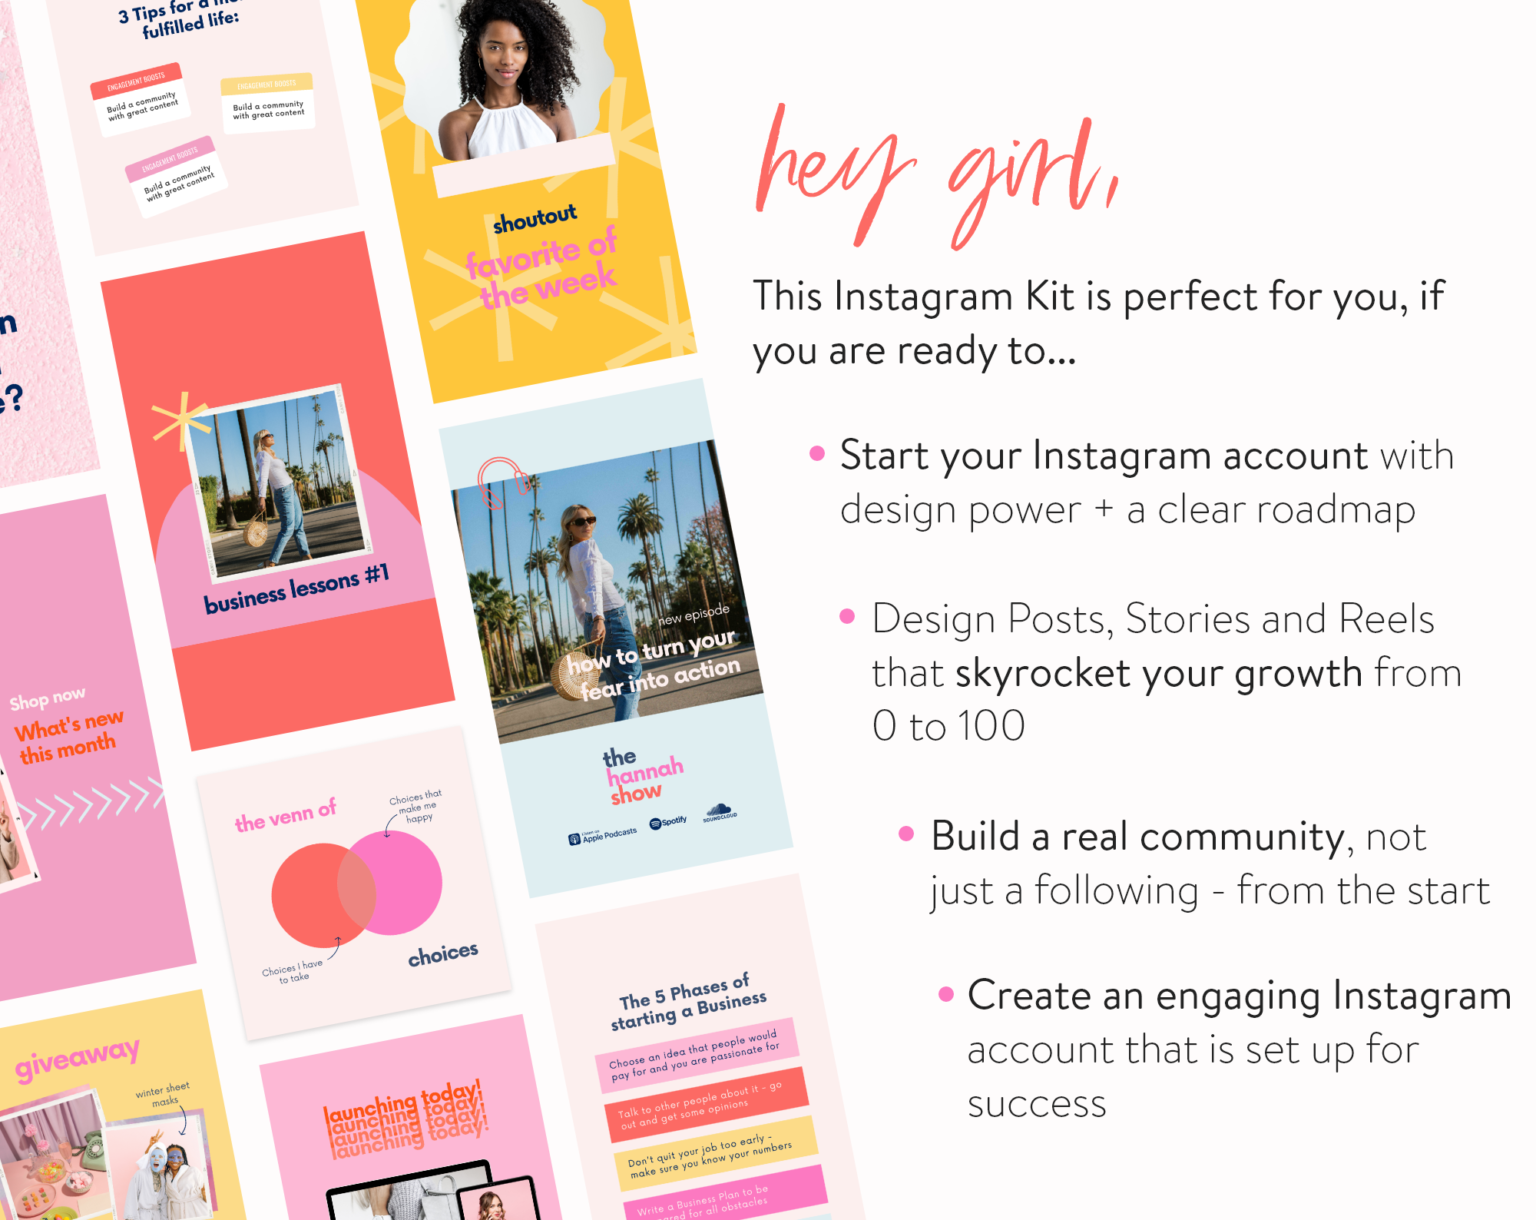 kickstart-your-Instagram-kit-for-canva-who-is-it-for